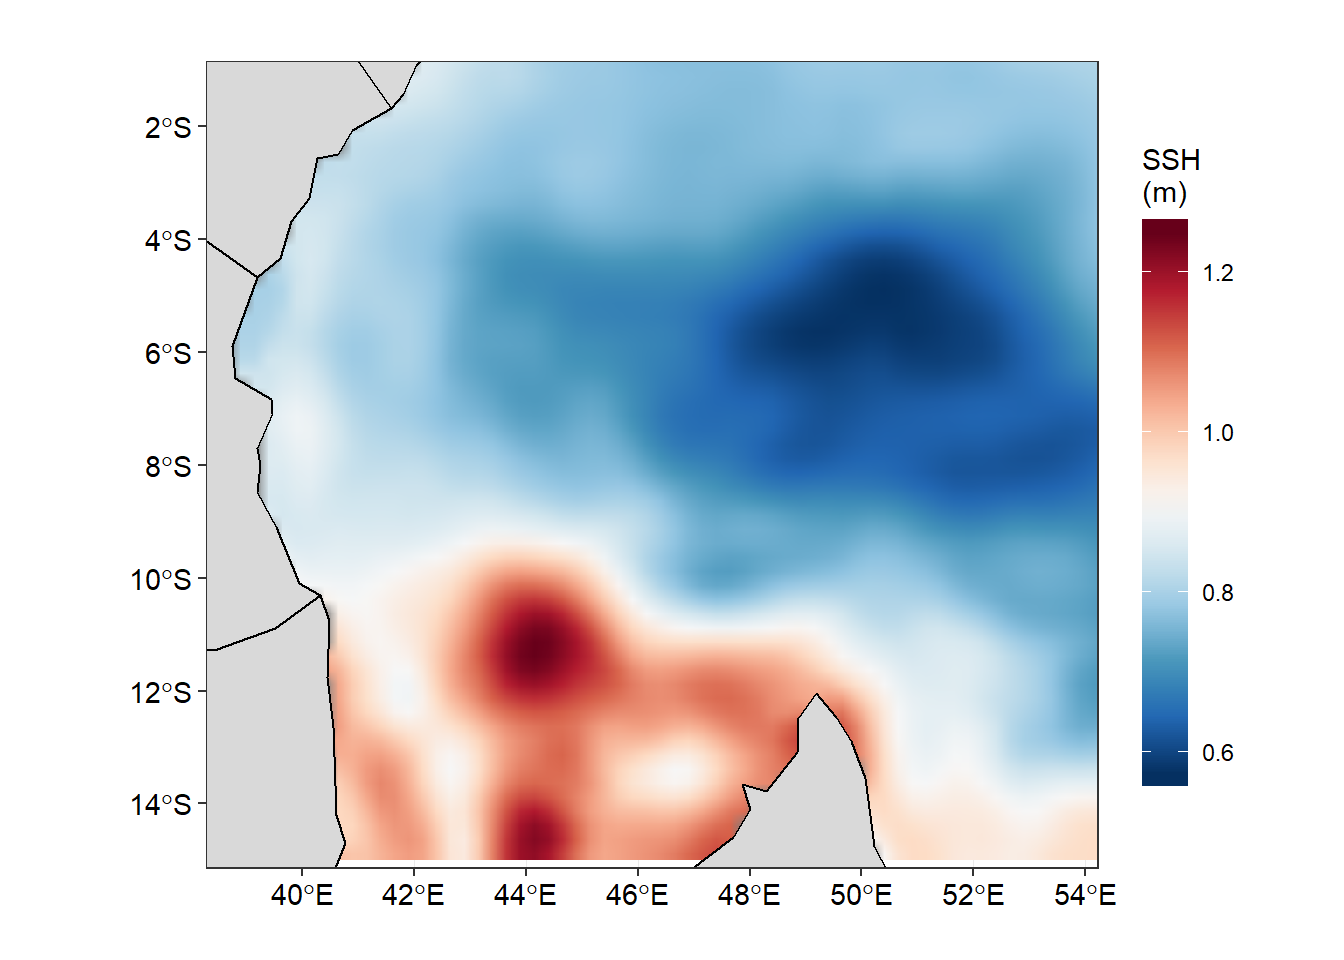 Sea Surface Height Anomaly in the Tropical Indian Ocean Region as of 2015-07-01